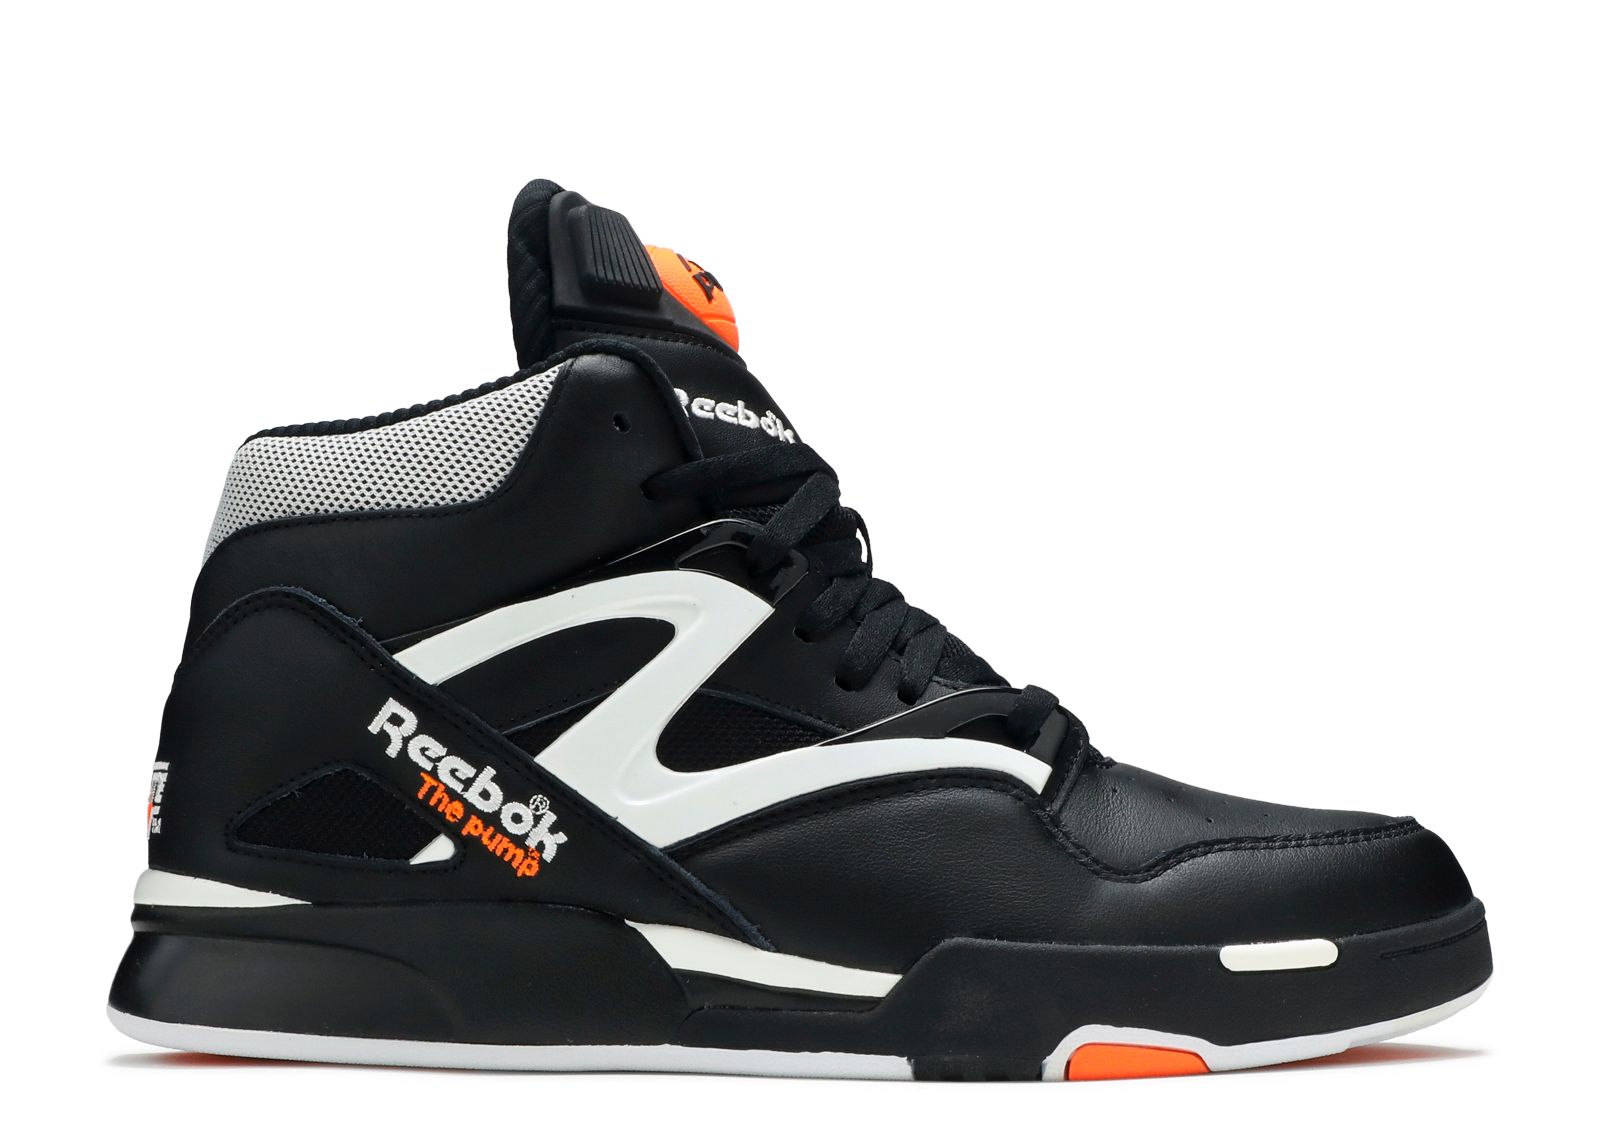 Buy Reebok Pump - All releases at a glance at